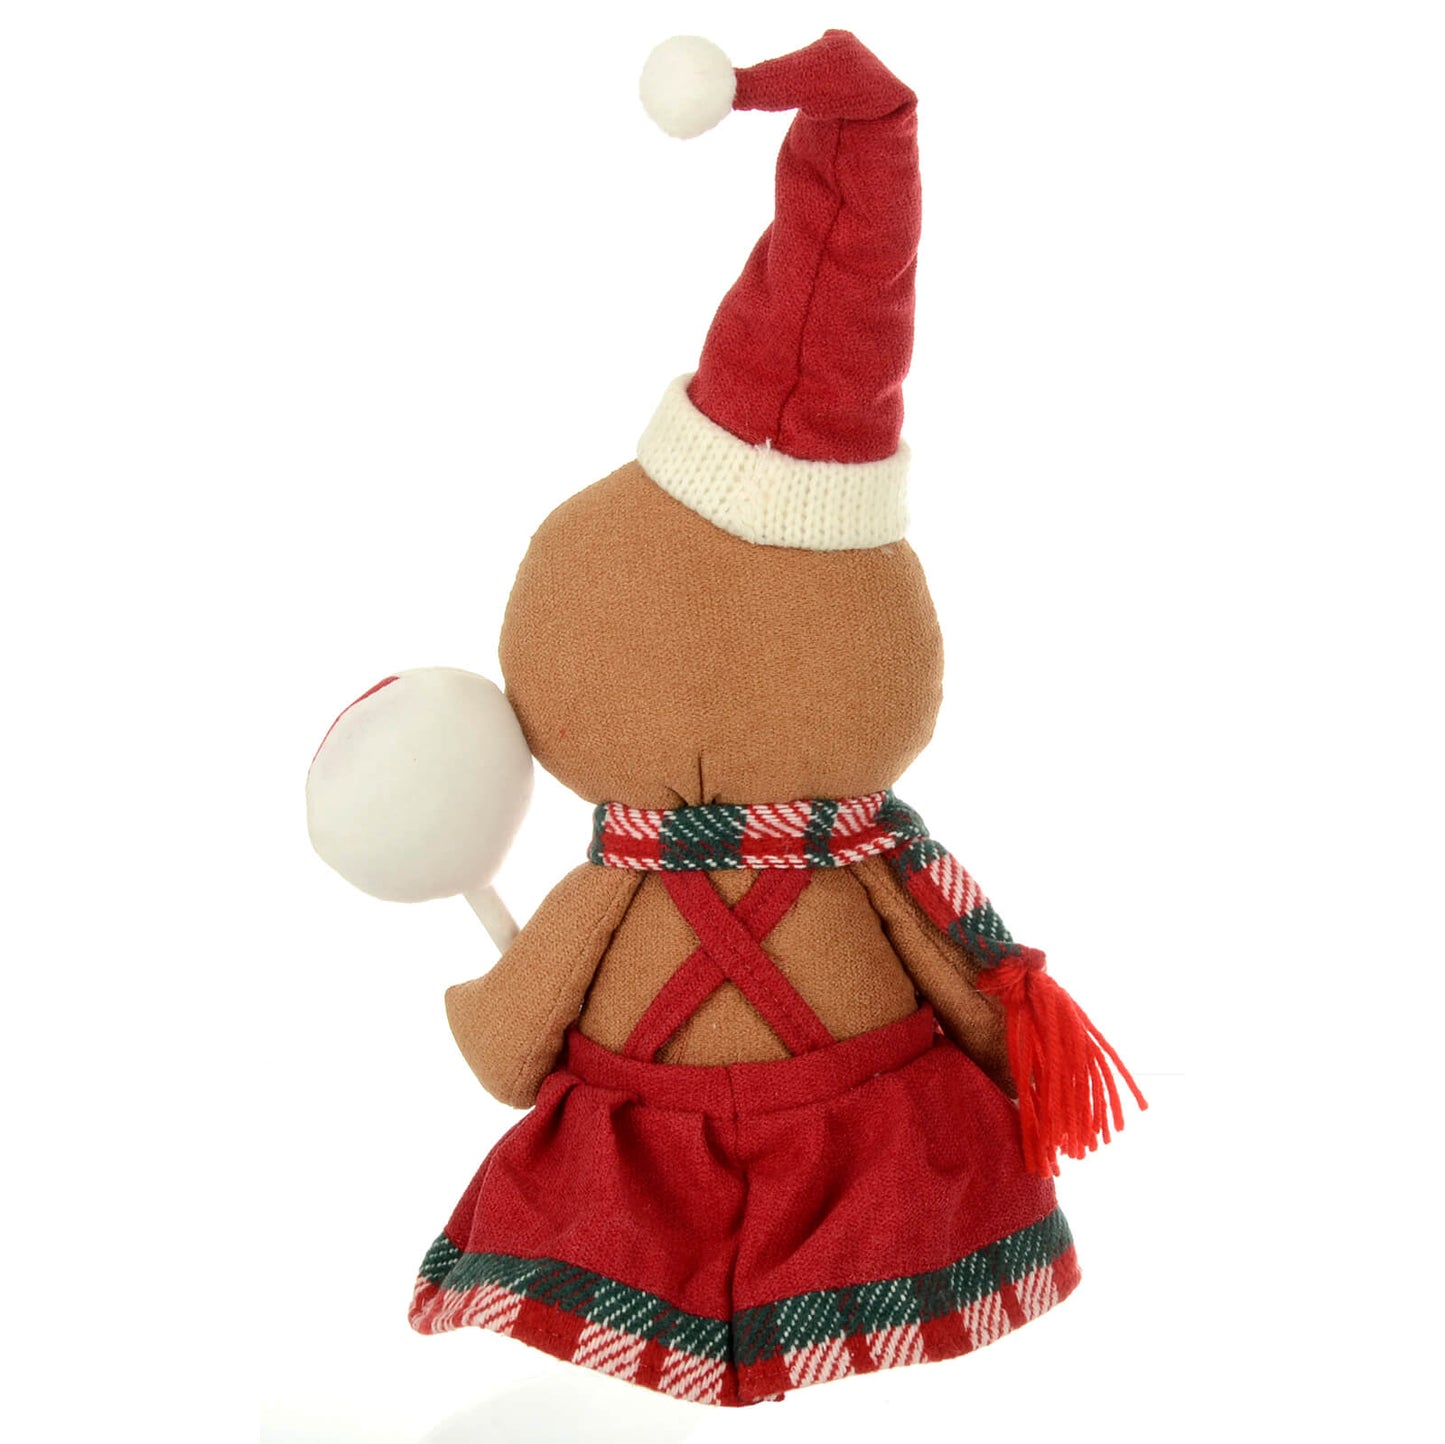 Mr Crimbo Fabric Gingerbread Figure With Christmas Candy 34cm